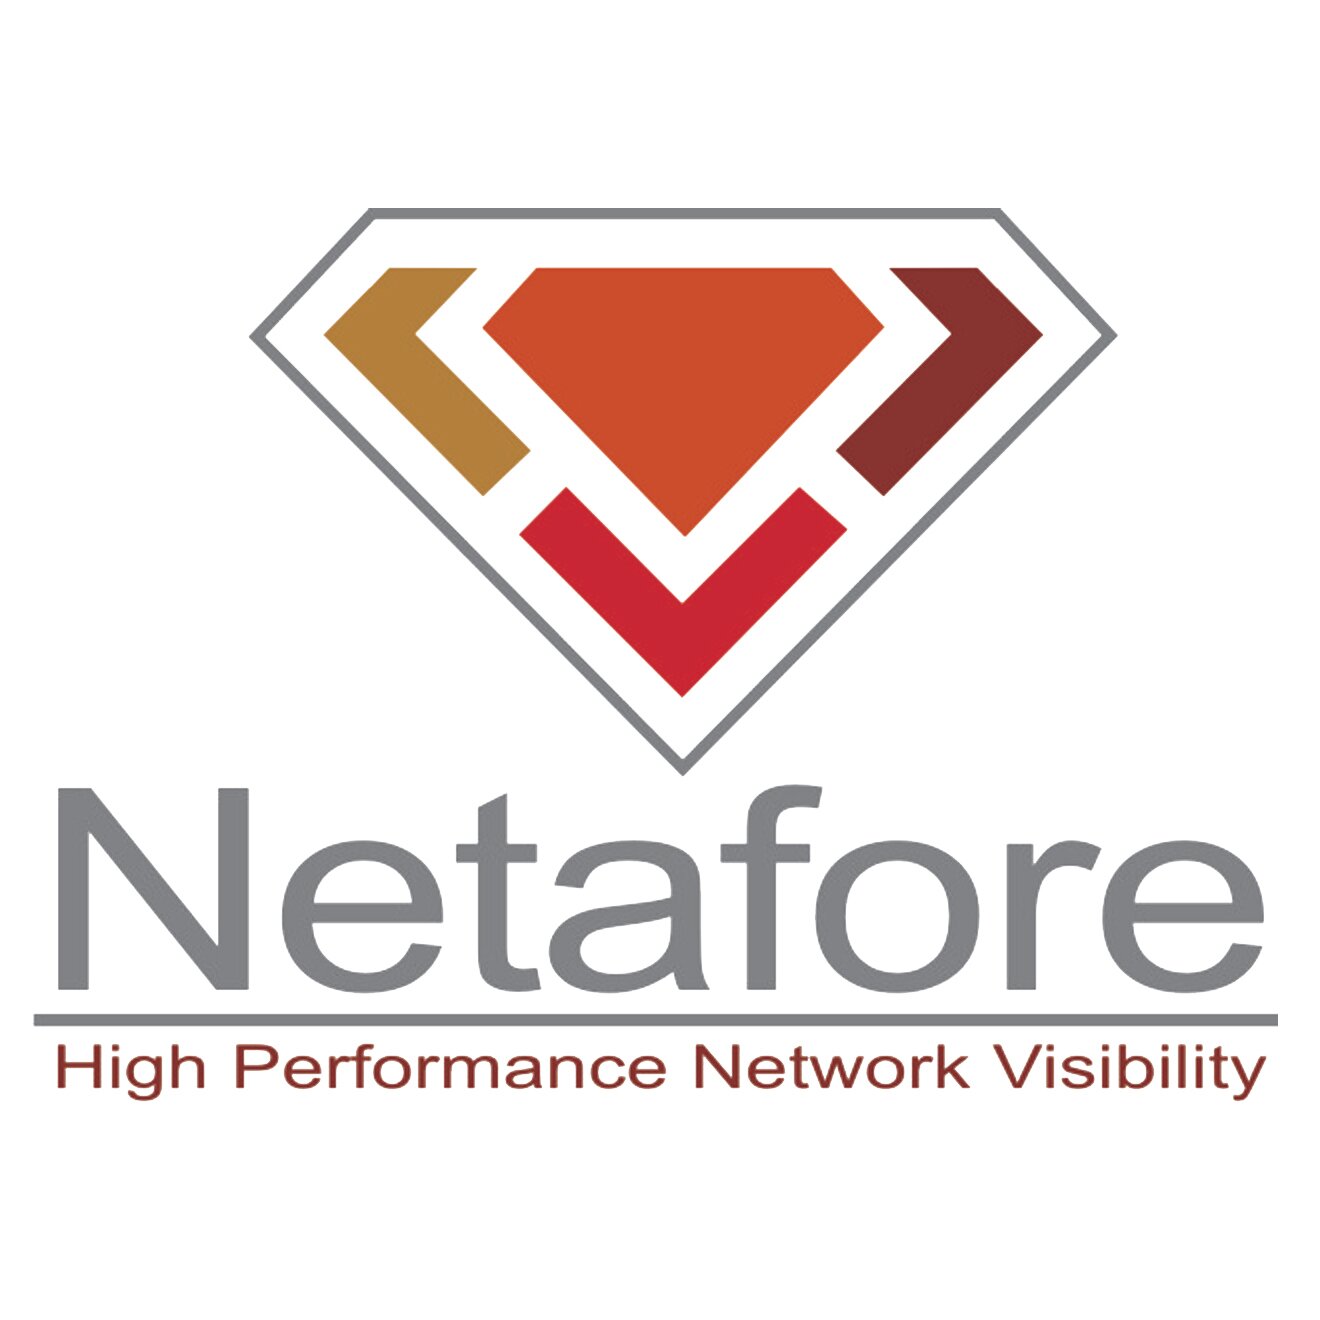 Netafore is the leading high performance network service provider and application performance monitoring, network analysis and troubleshooting solution.